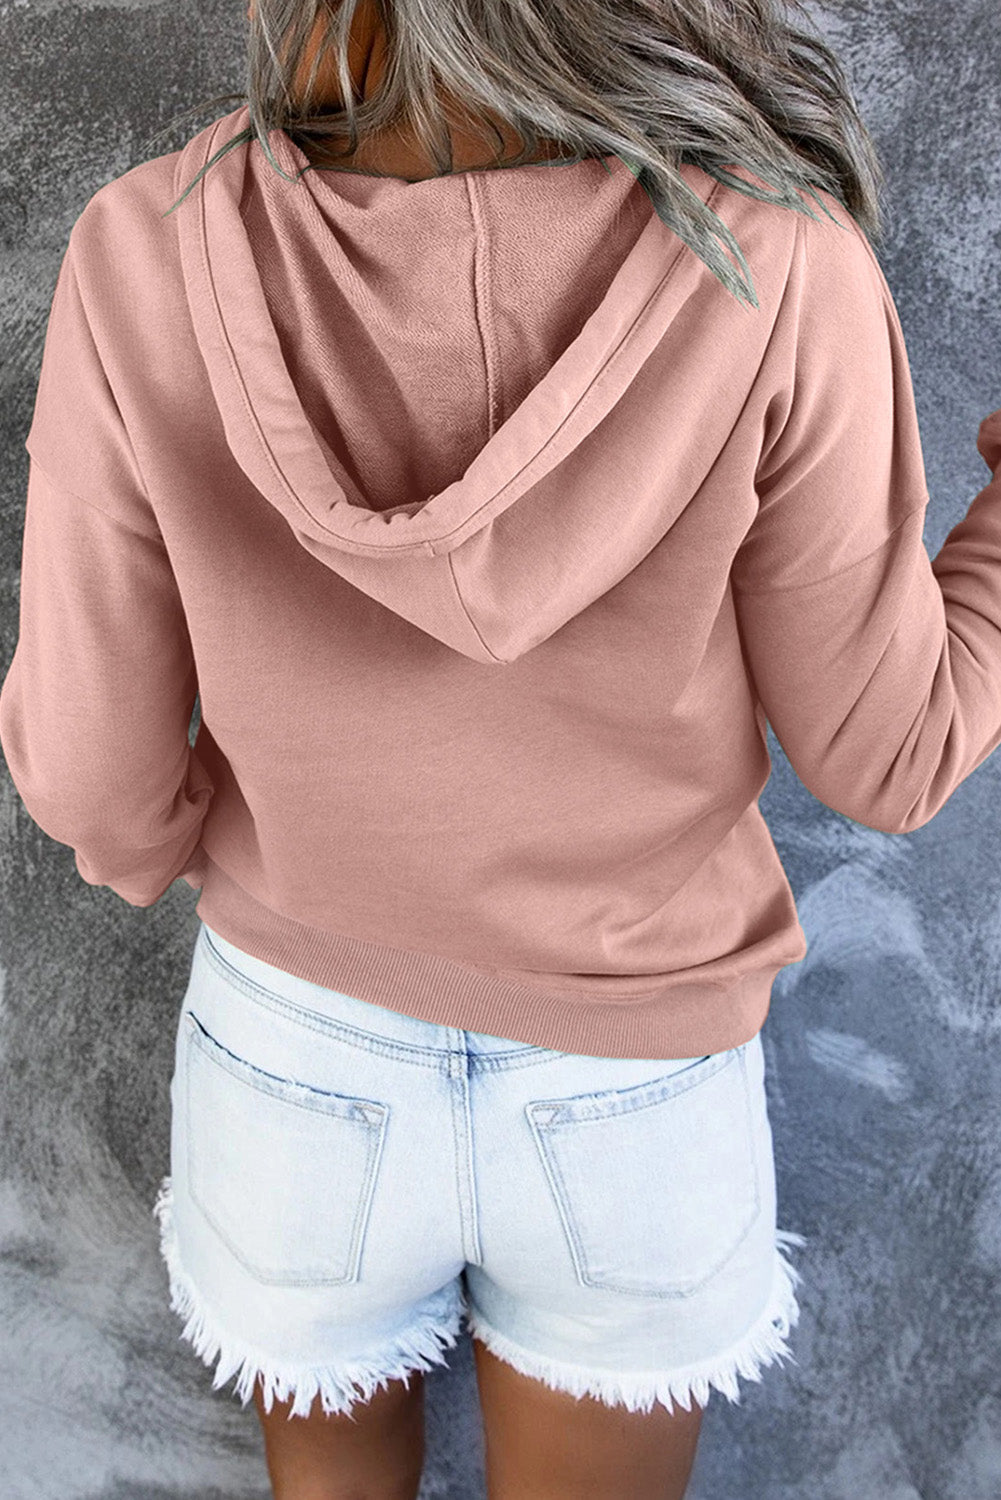 Dropped Shoulder Long Sleeve Hoodie with Pocket - Women’s Clothing & Accessories - Shirts & Tops - 2 - 2024